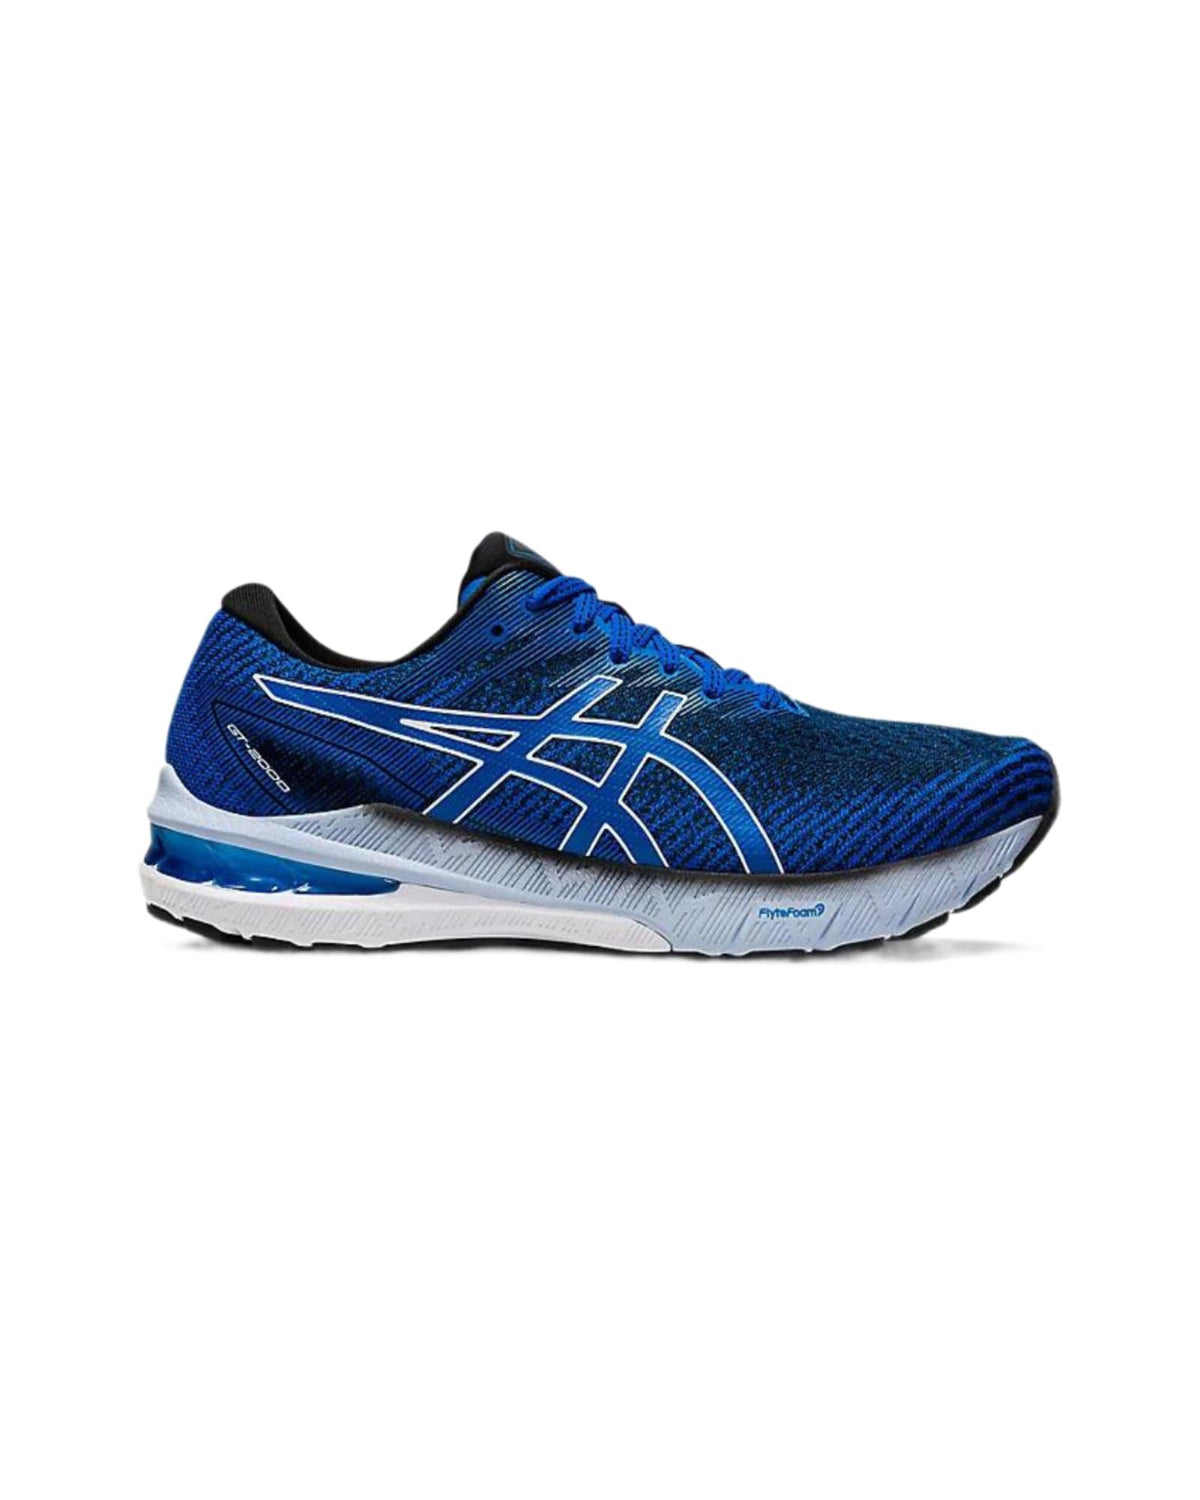 Stable and Responsive Running Shoe - 14 US